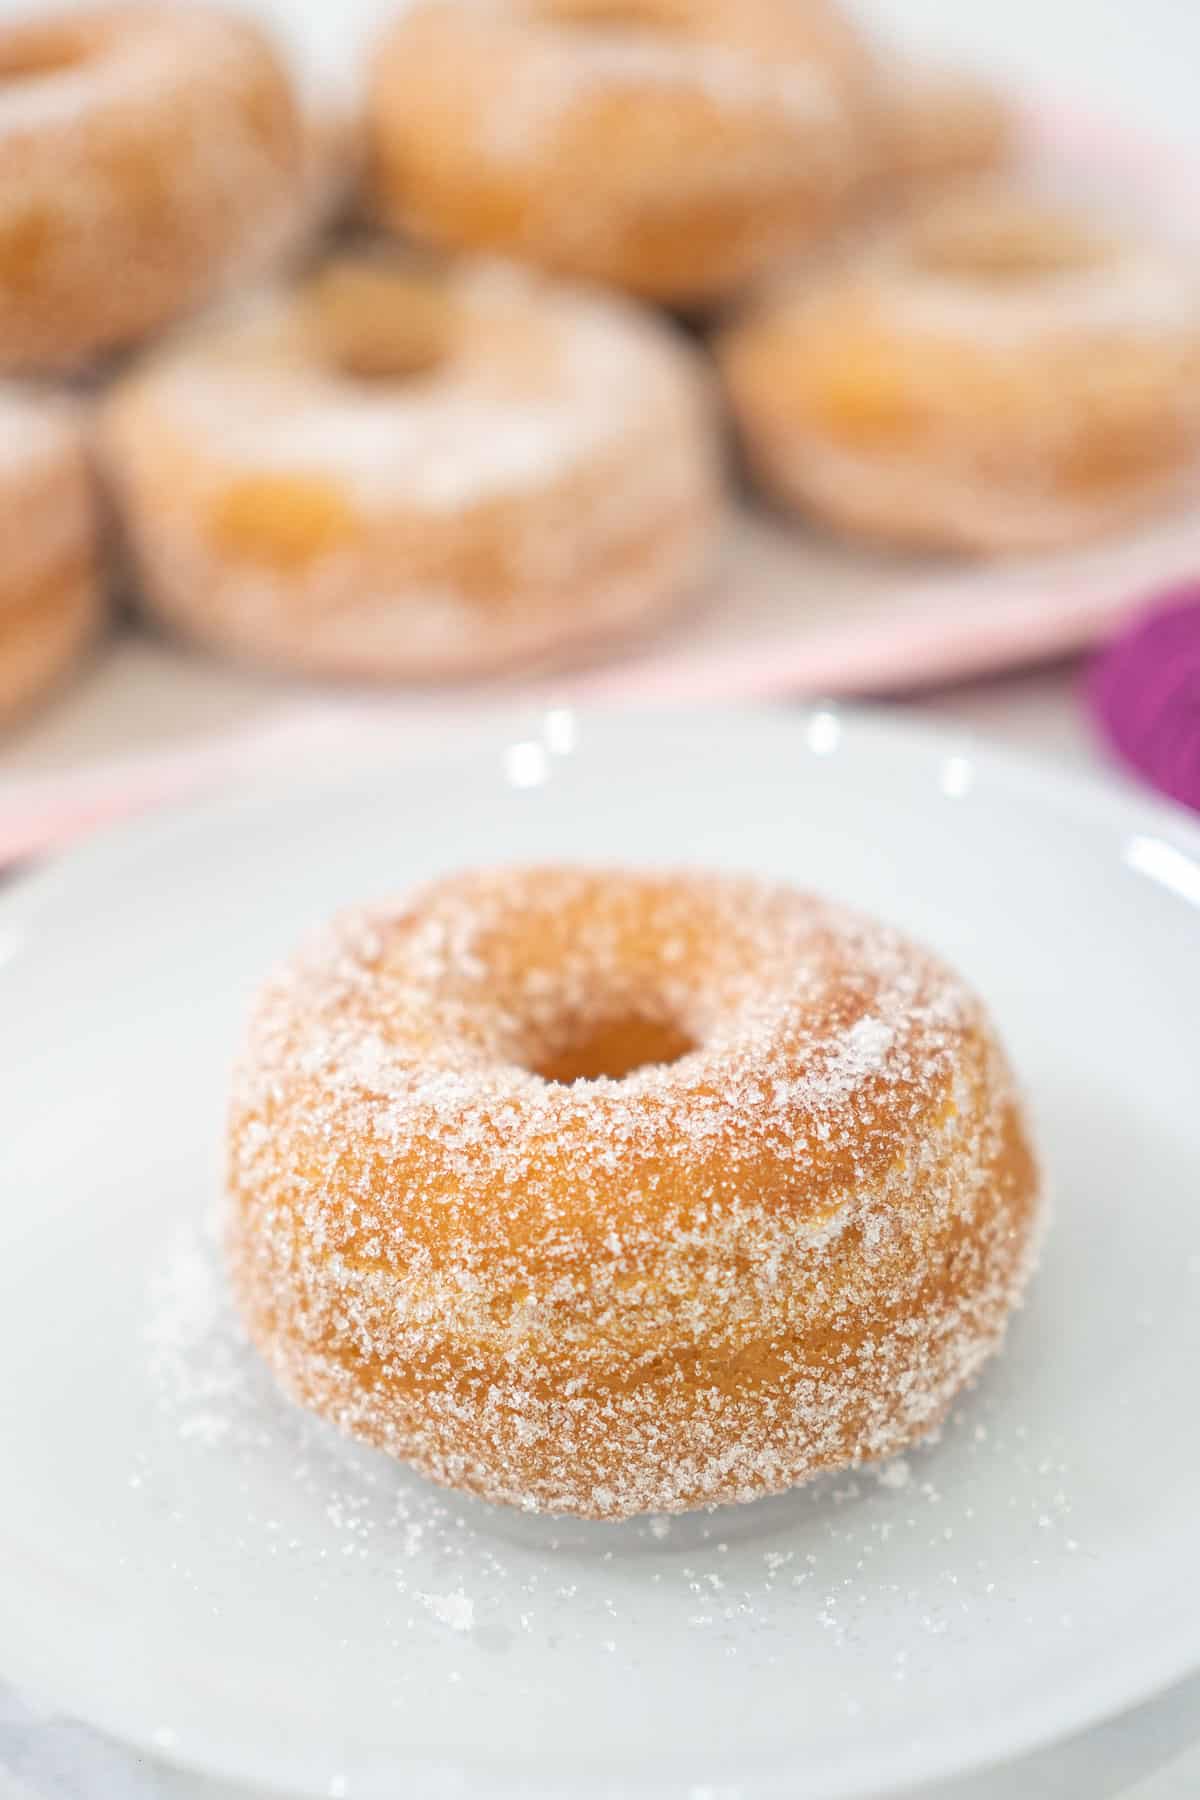 A sugar coated, old fashioned homemade yeast doughnut on a white plate. In the background is a pink tray of doughnuts.